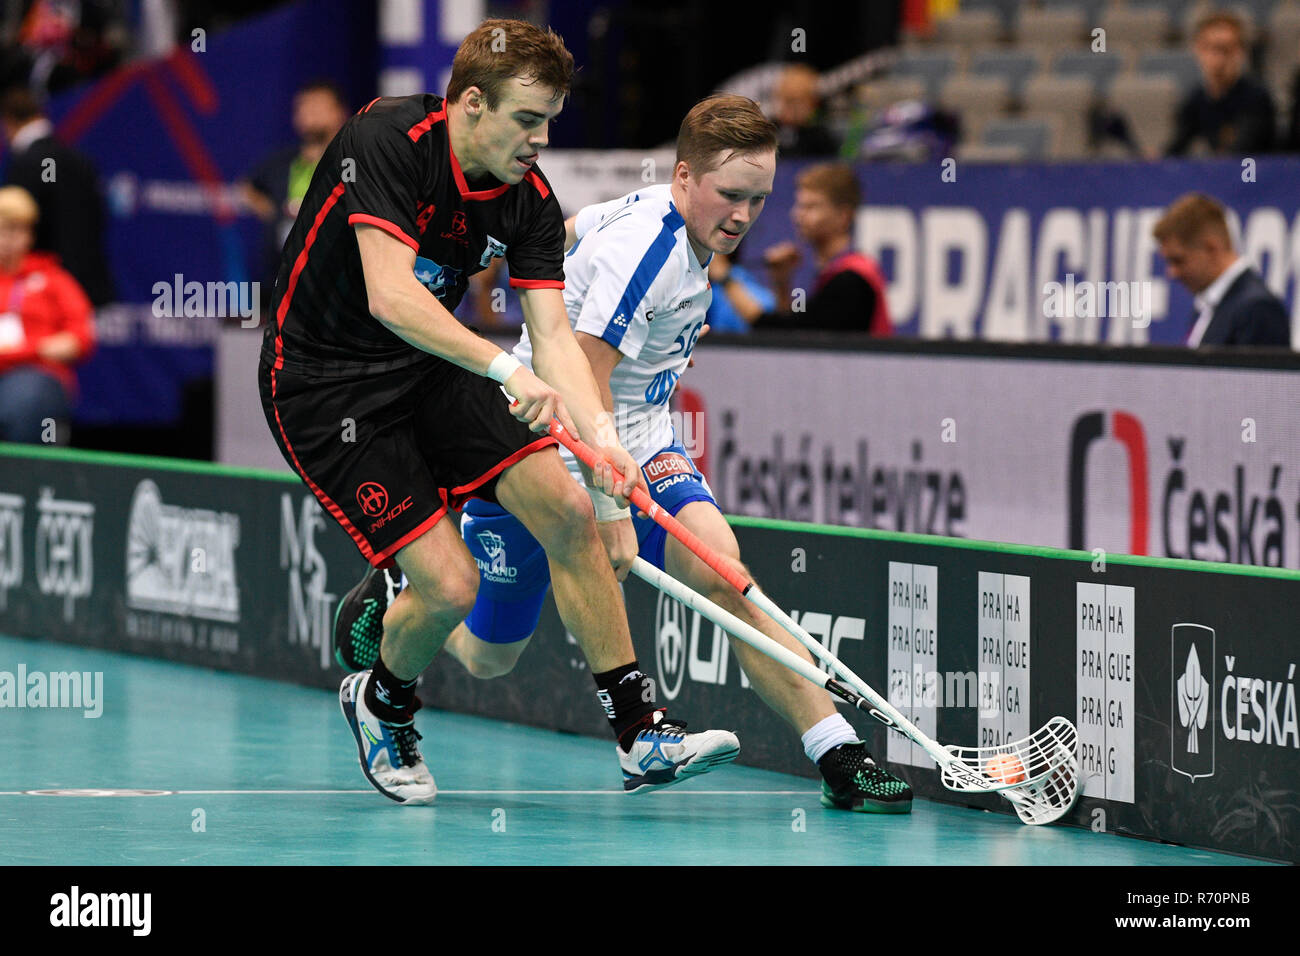 Prague, Czech Republic. 07th Dec, 2018. L-R Maximillian Falkenberger (GER) and Krister Savonen (FIN) in action during the Men's World Floorball Championships quarterfinal match Finland vs Germany, played in Prague, Czech Republic, on December 7, 2018. Credit: Michal Kamaryt/CTK Photo/Alamy Live News Stock Photo